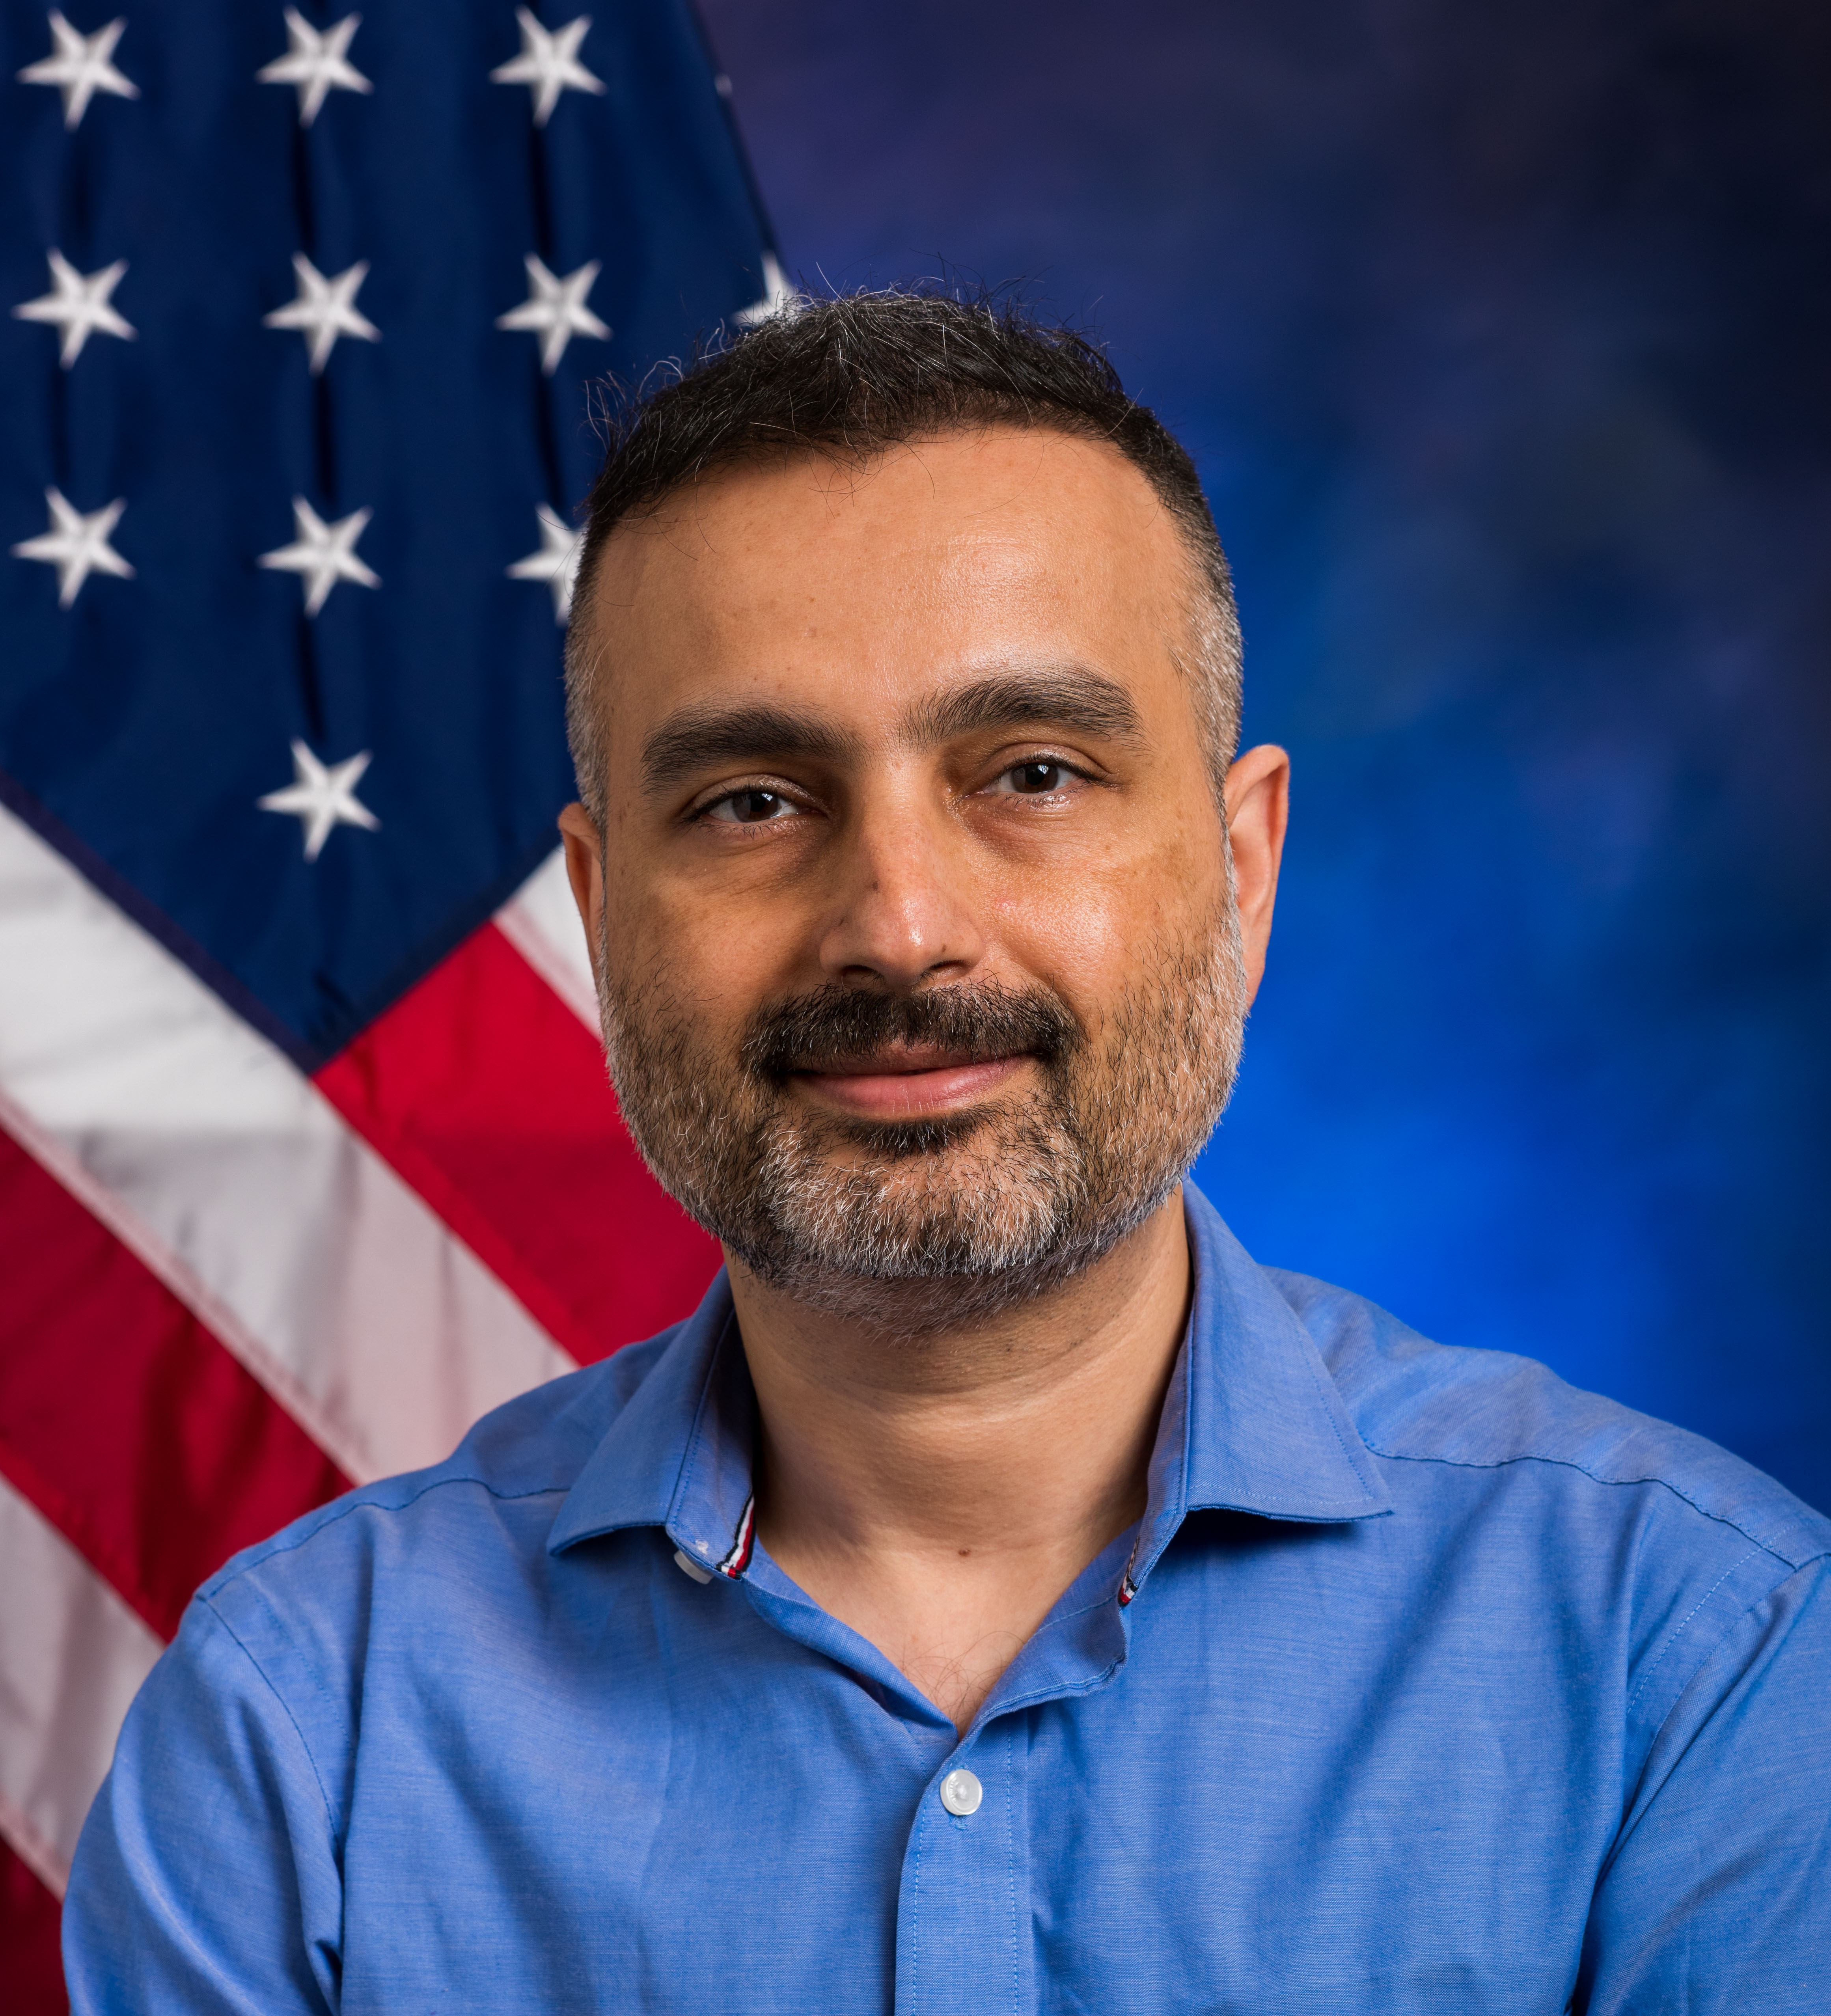 Headshot of Dr. Bajaj. He is smiling for the photo and wearing a collared shirt with an American flag behind him.